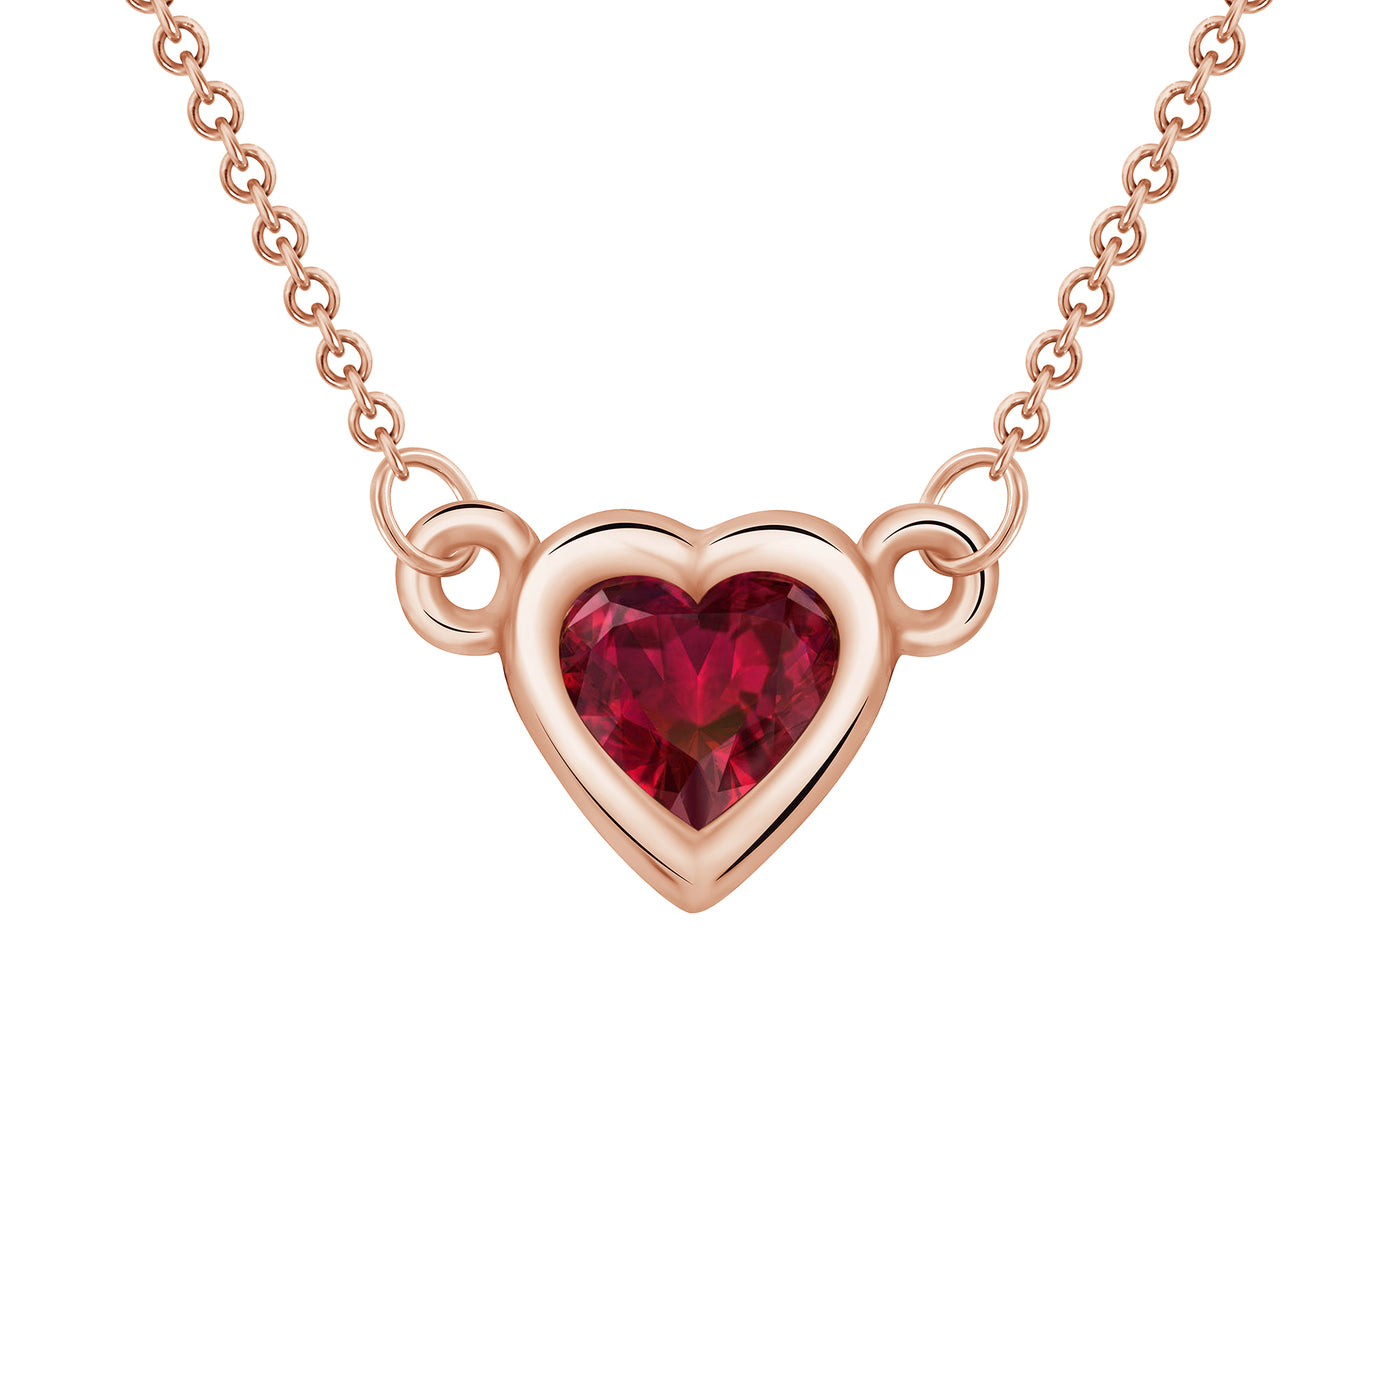 Bezel Set 0.25 Carat Ruby Heart Shape Solitaire Pendant in Yellow, White, or Rose Gold with 16" Rolo Chain